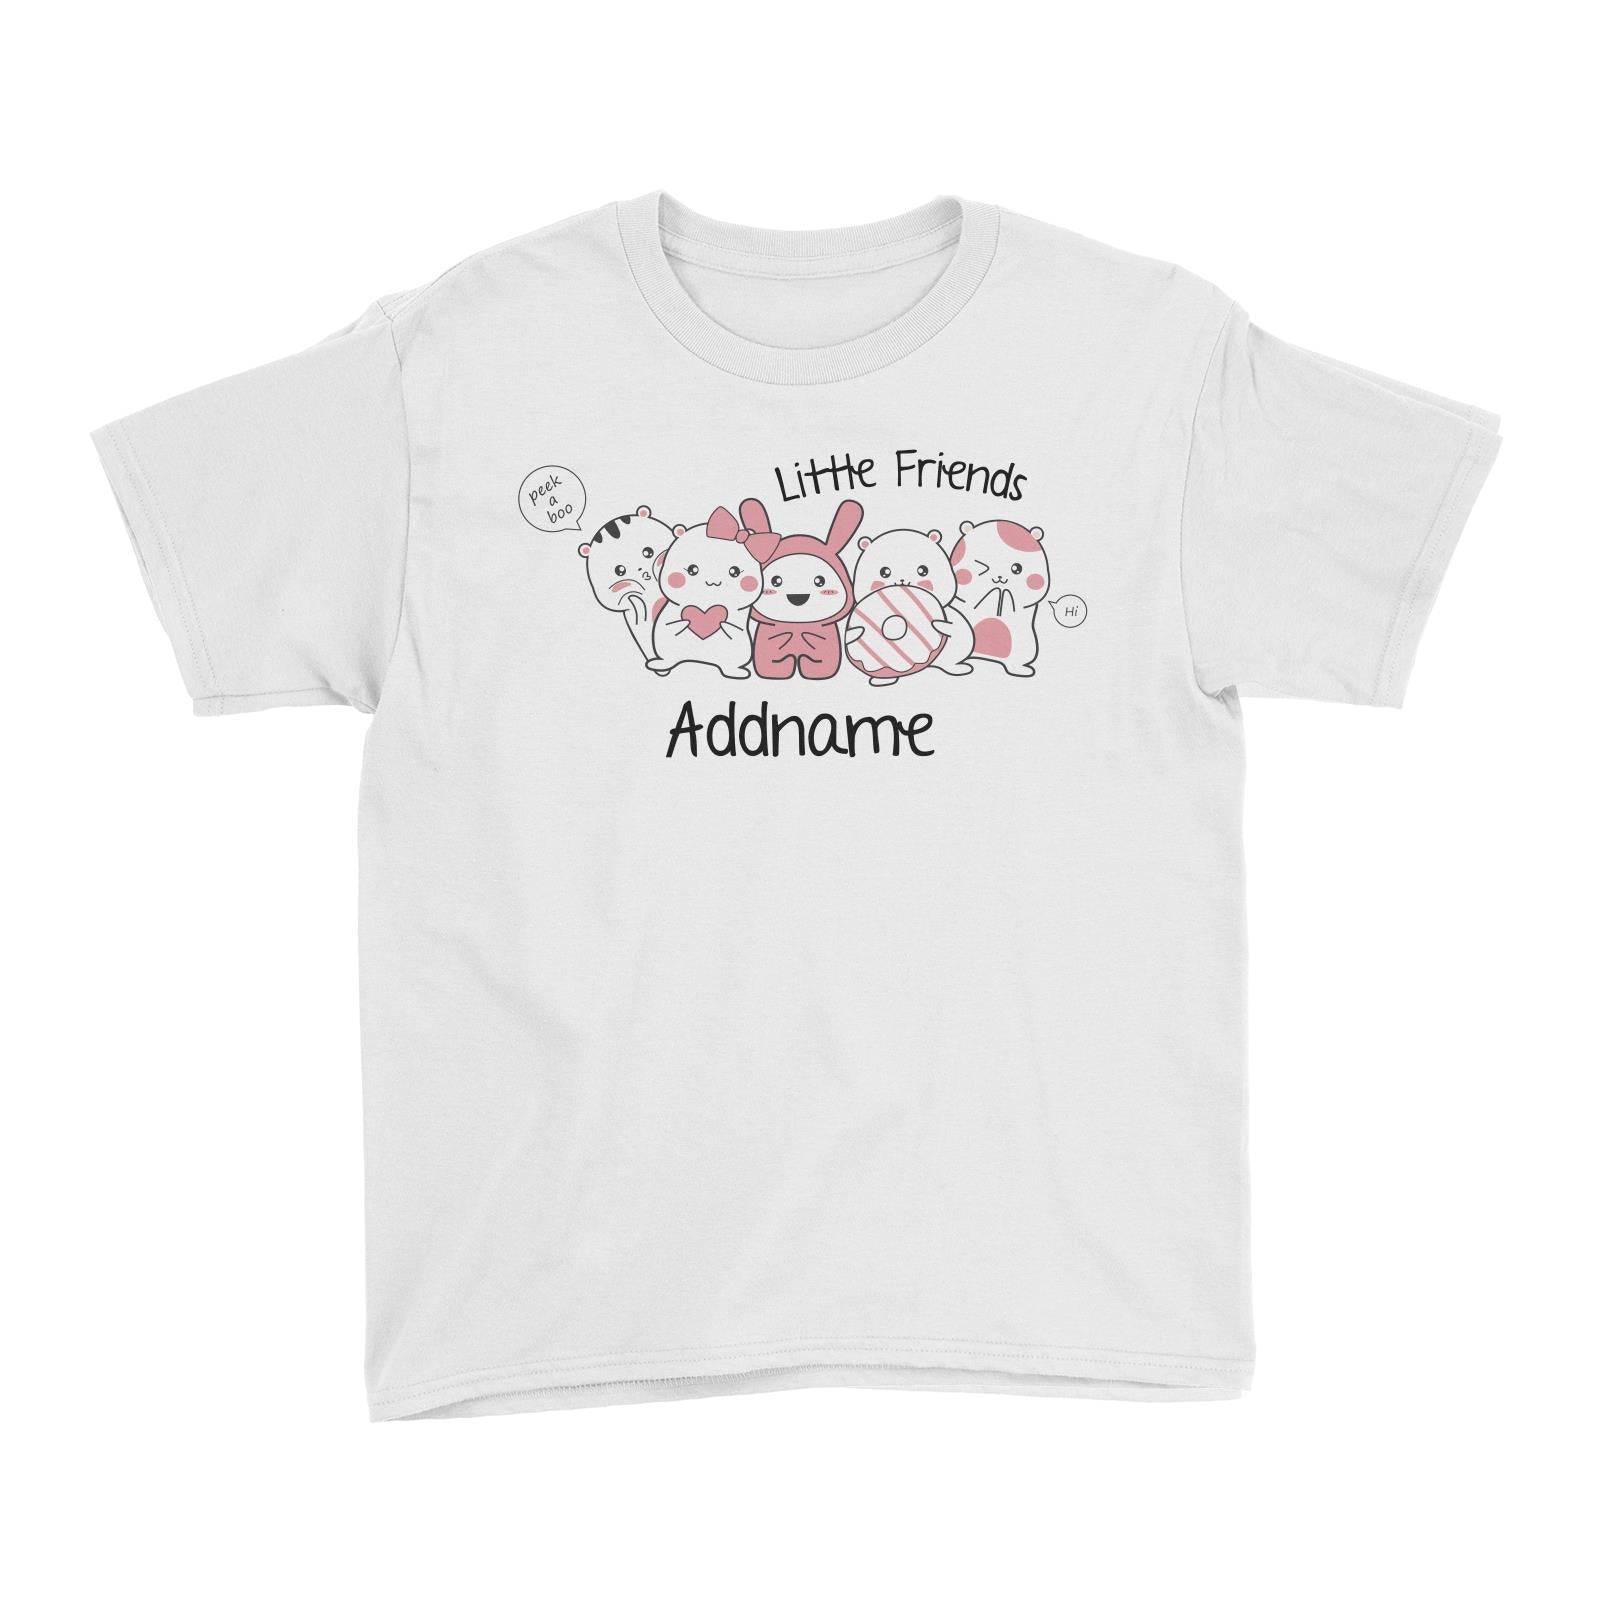 Cute Animals And Friends Series Cute Hamster Little Friends Addname Kid's T-Shirt